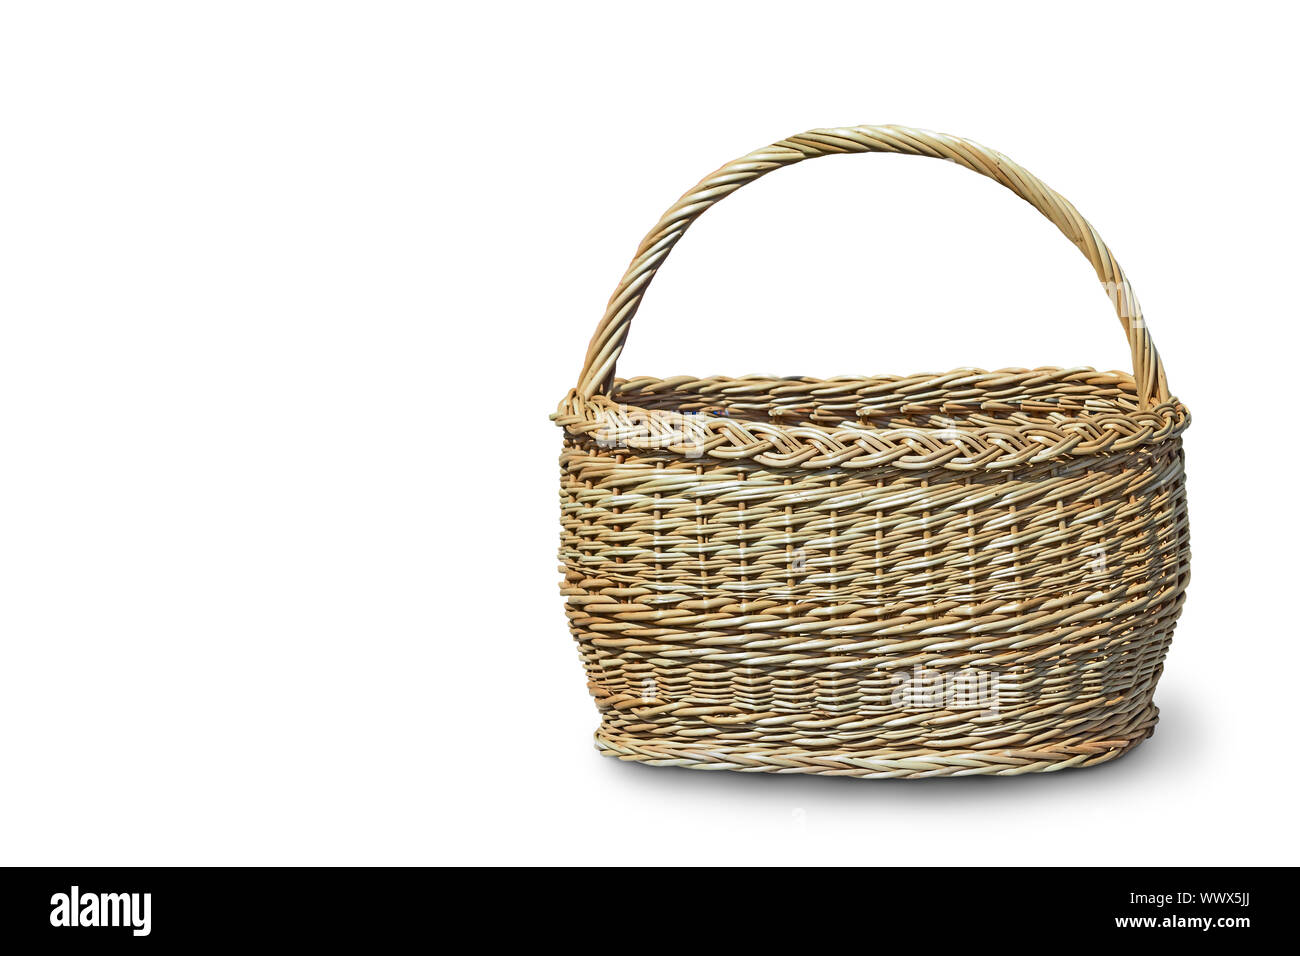 Comfortable wicker basket on a white background. Stock Photo